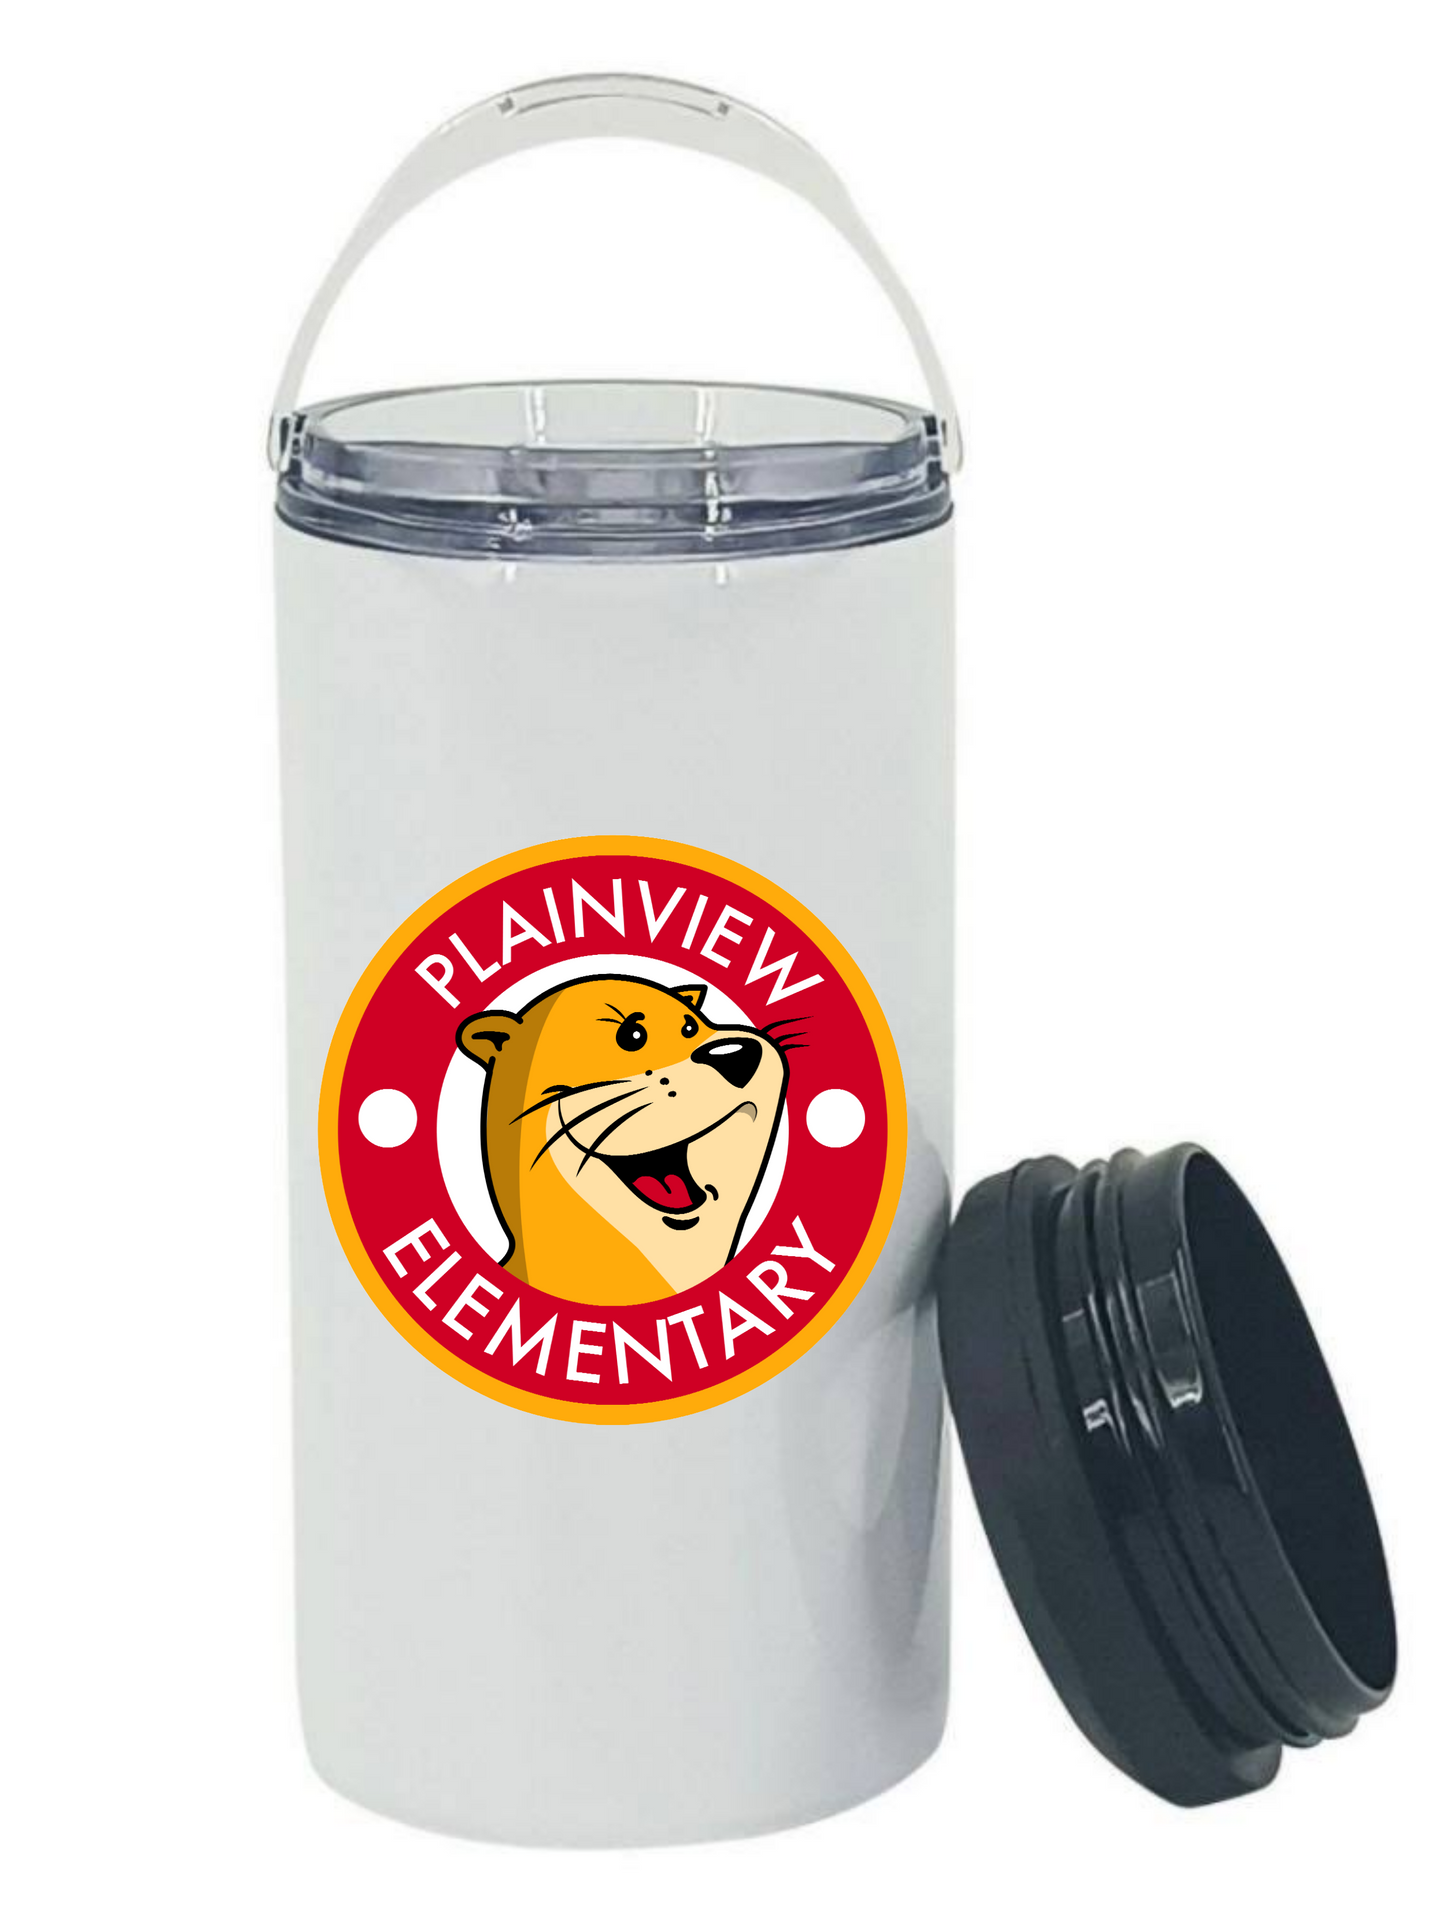 Plainview Elementary 4 in 1 Tumbler/Can Cooler